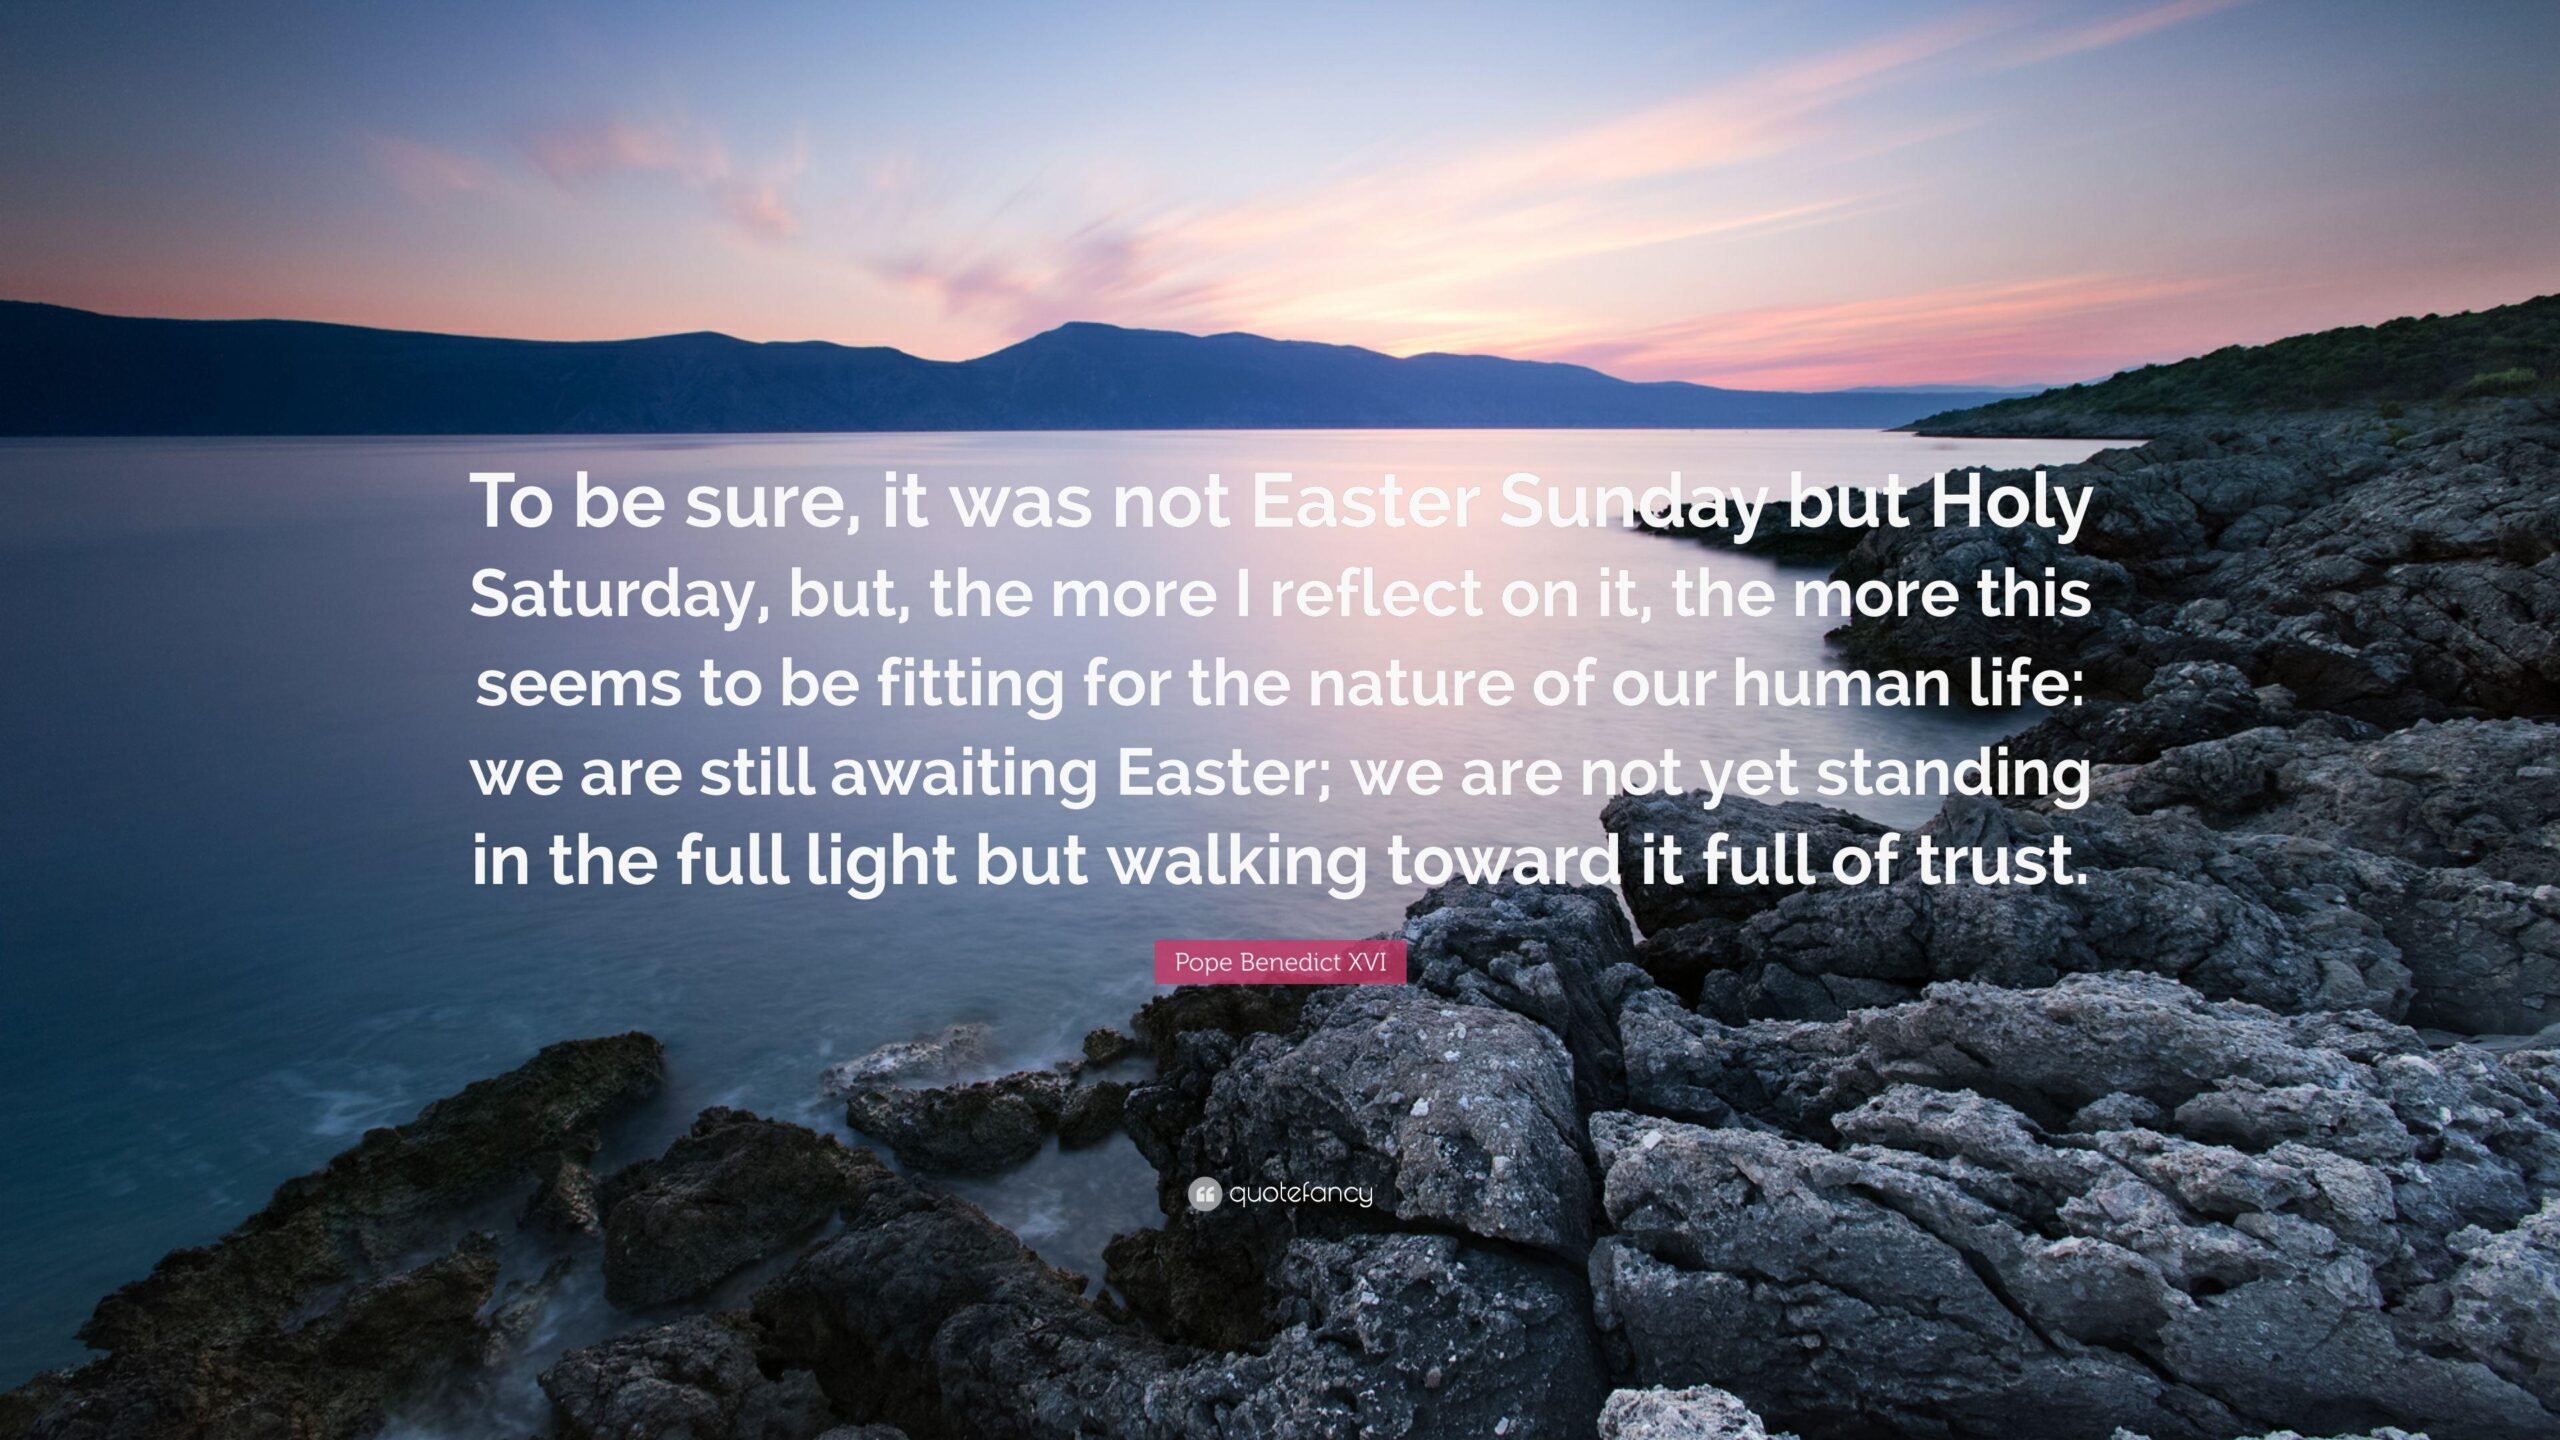 Pope Benedict XVI Quote “To be sure, it was not Easter Sunday but